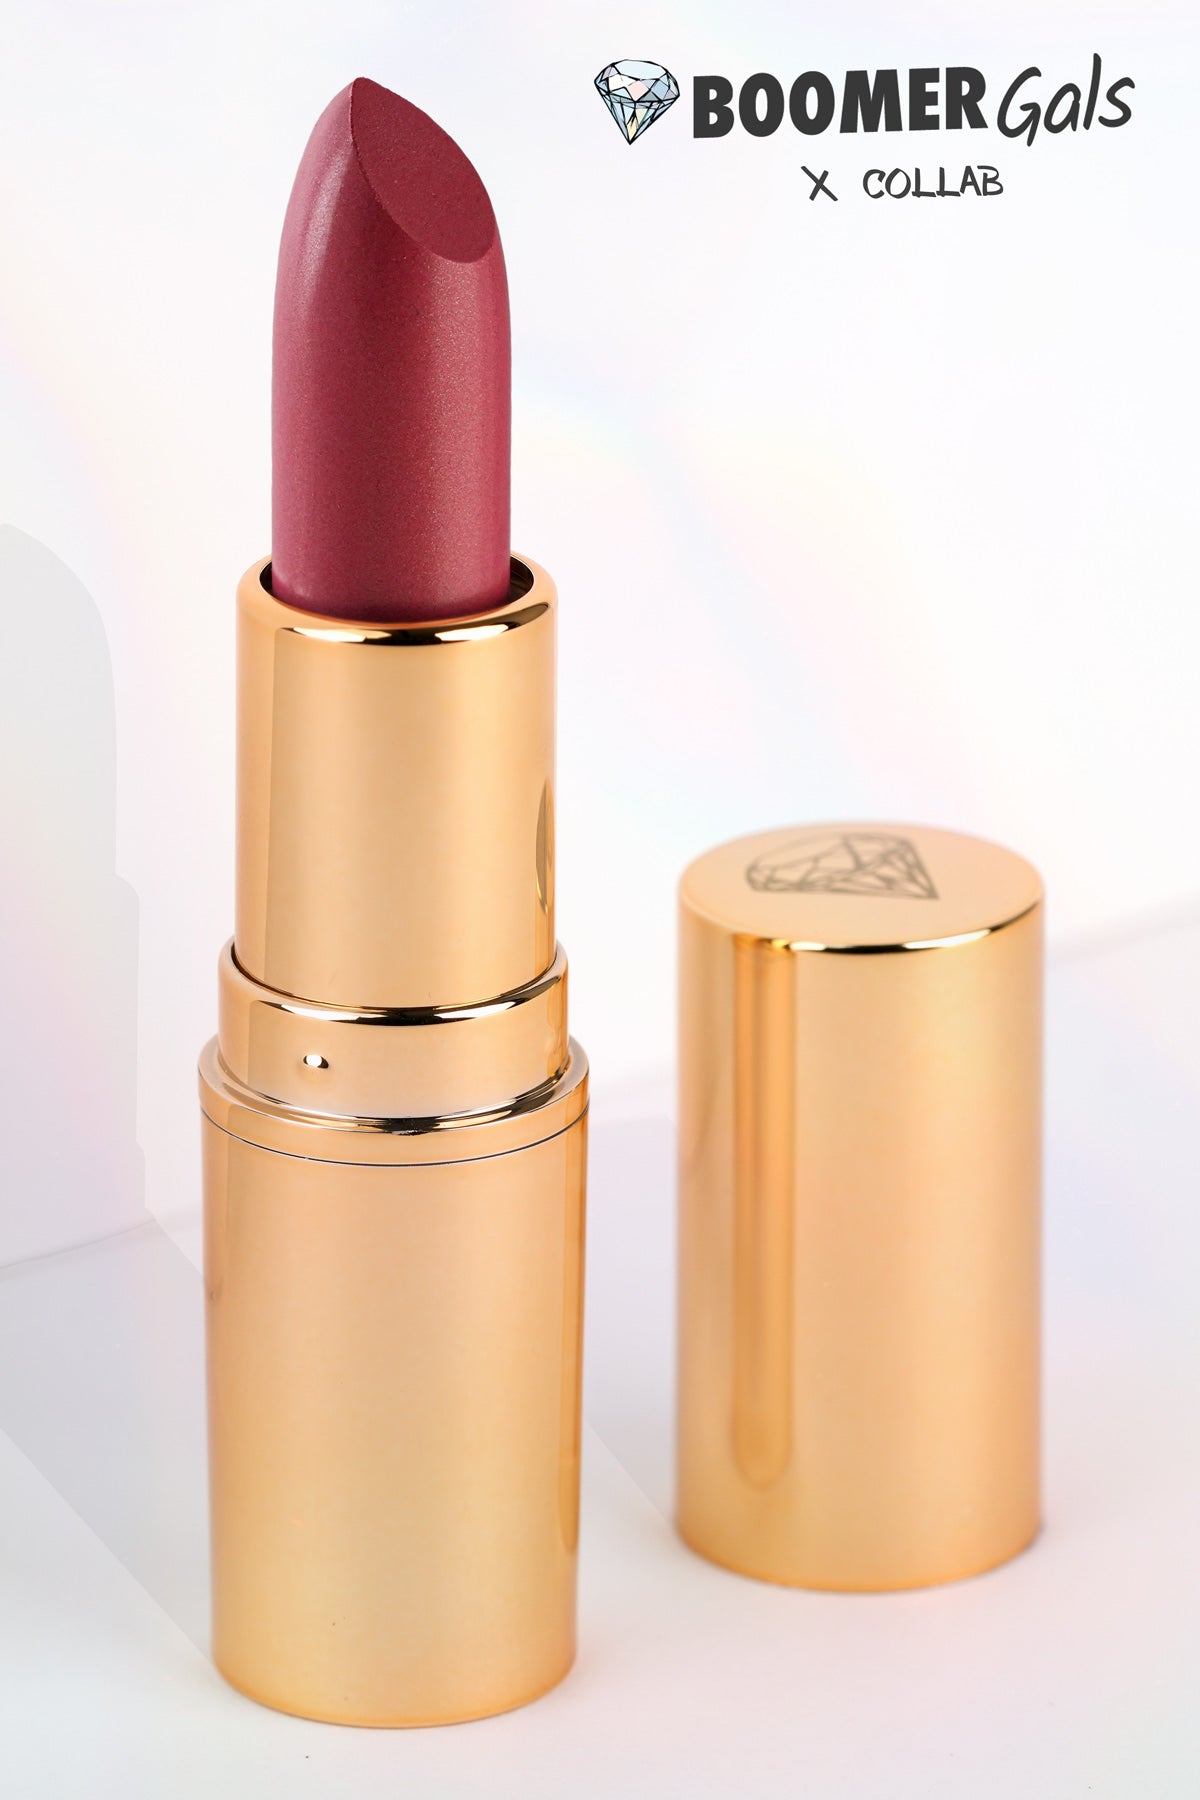 'Diane’s shimmery burgundy' Boomer Gals - Ultra Lux Hydrating Lipstick